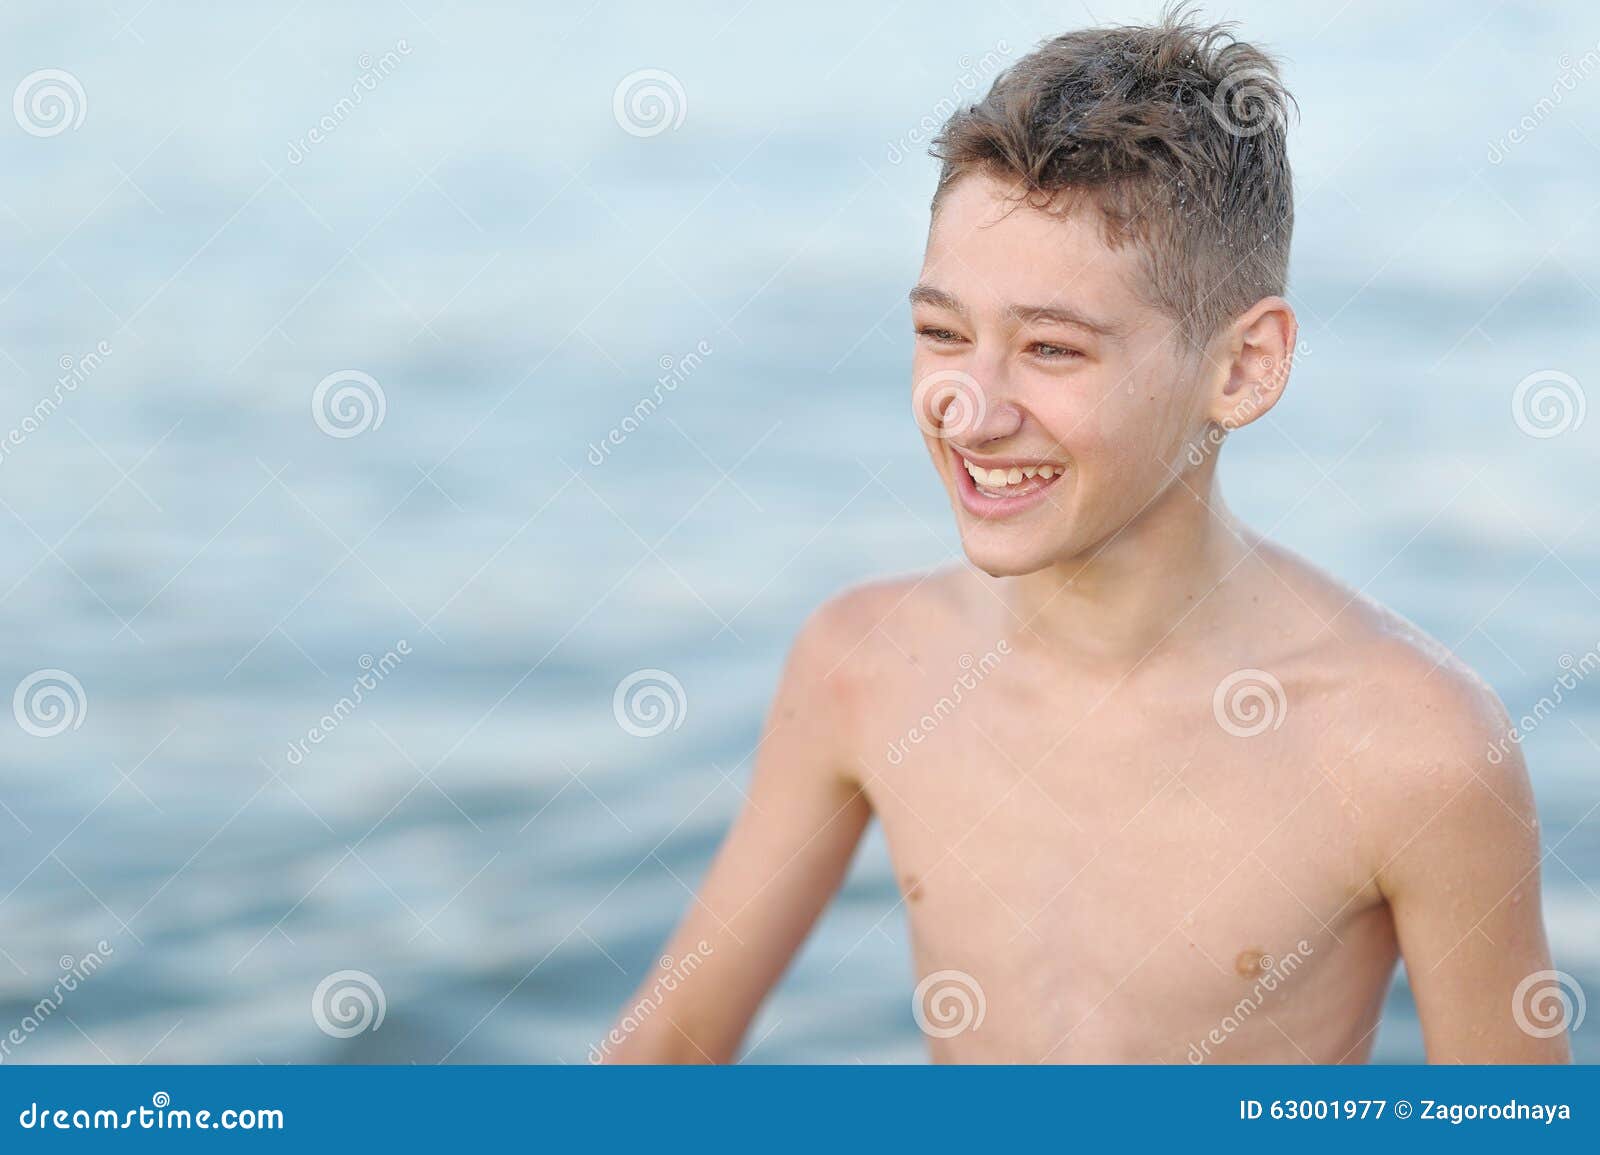 Portrait of a Boy in the Summer Stock Image - Image of outdoor ...